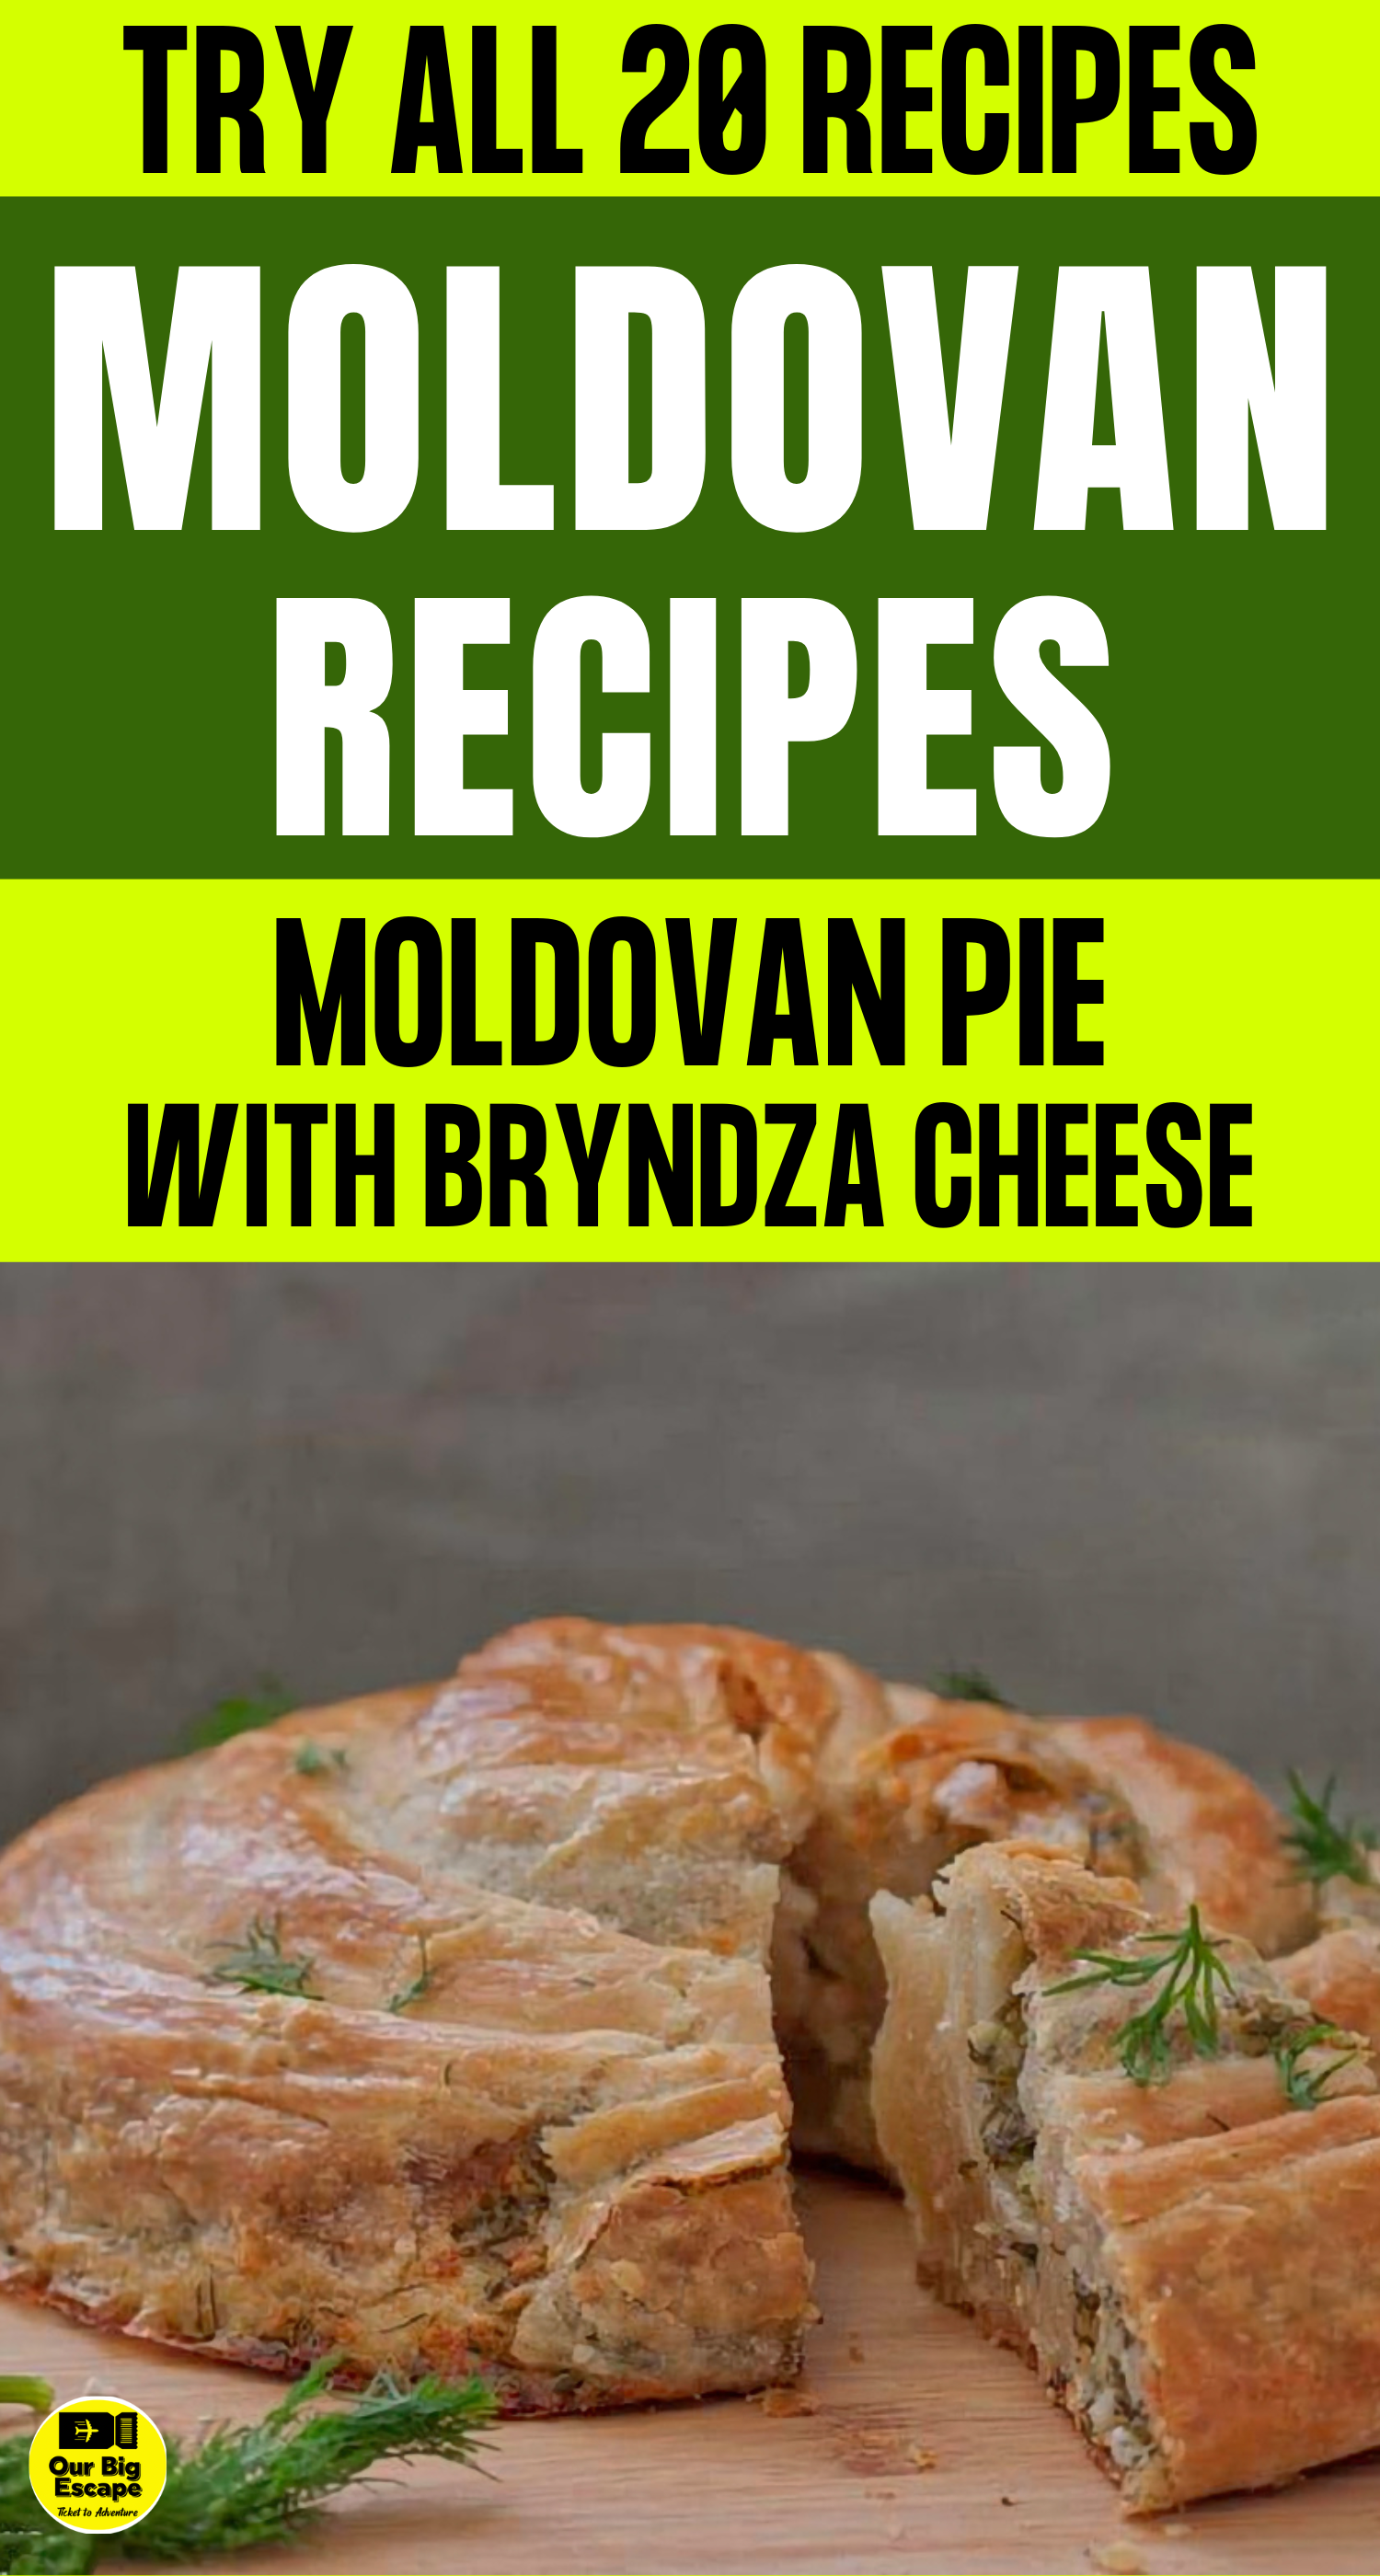 20 Moldovan Recipes - Moldovan Pie With Bryndza Cheese